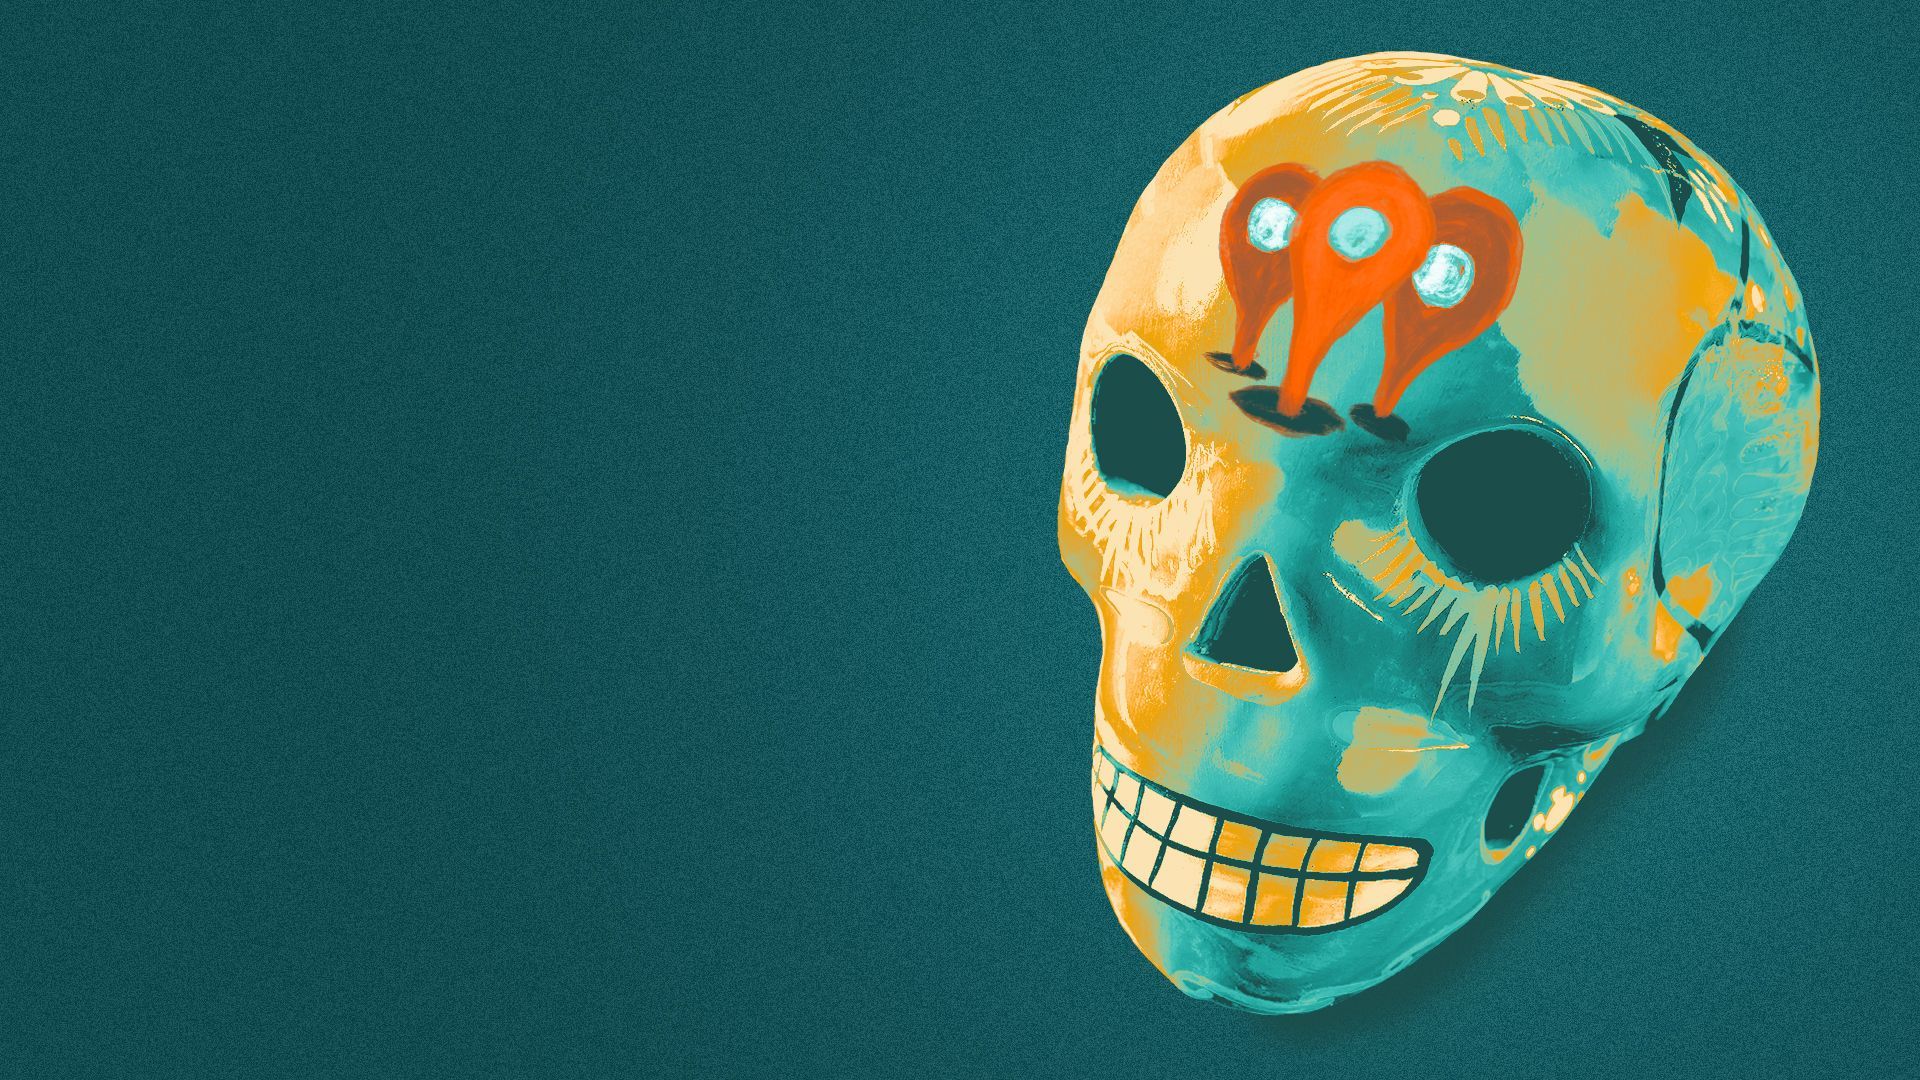 Illustration of a sugar skull with three GPS location pins on its forehead.